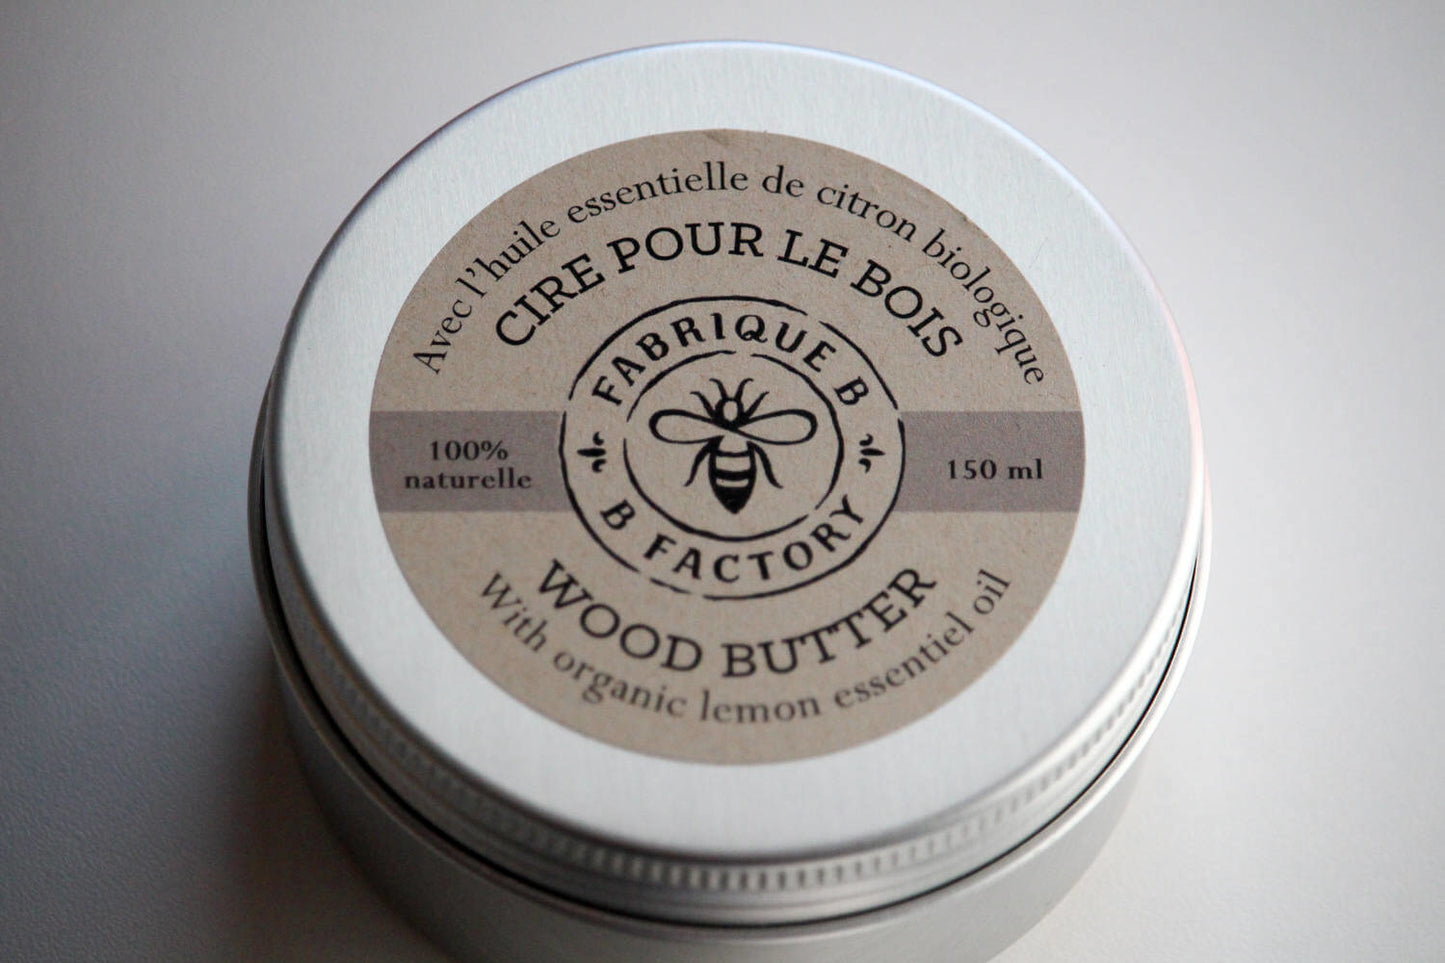 Wood Butter (150ml) by B Factory